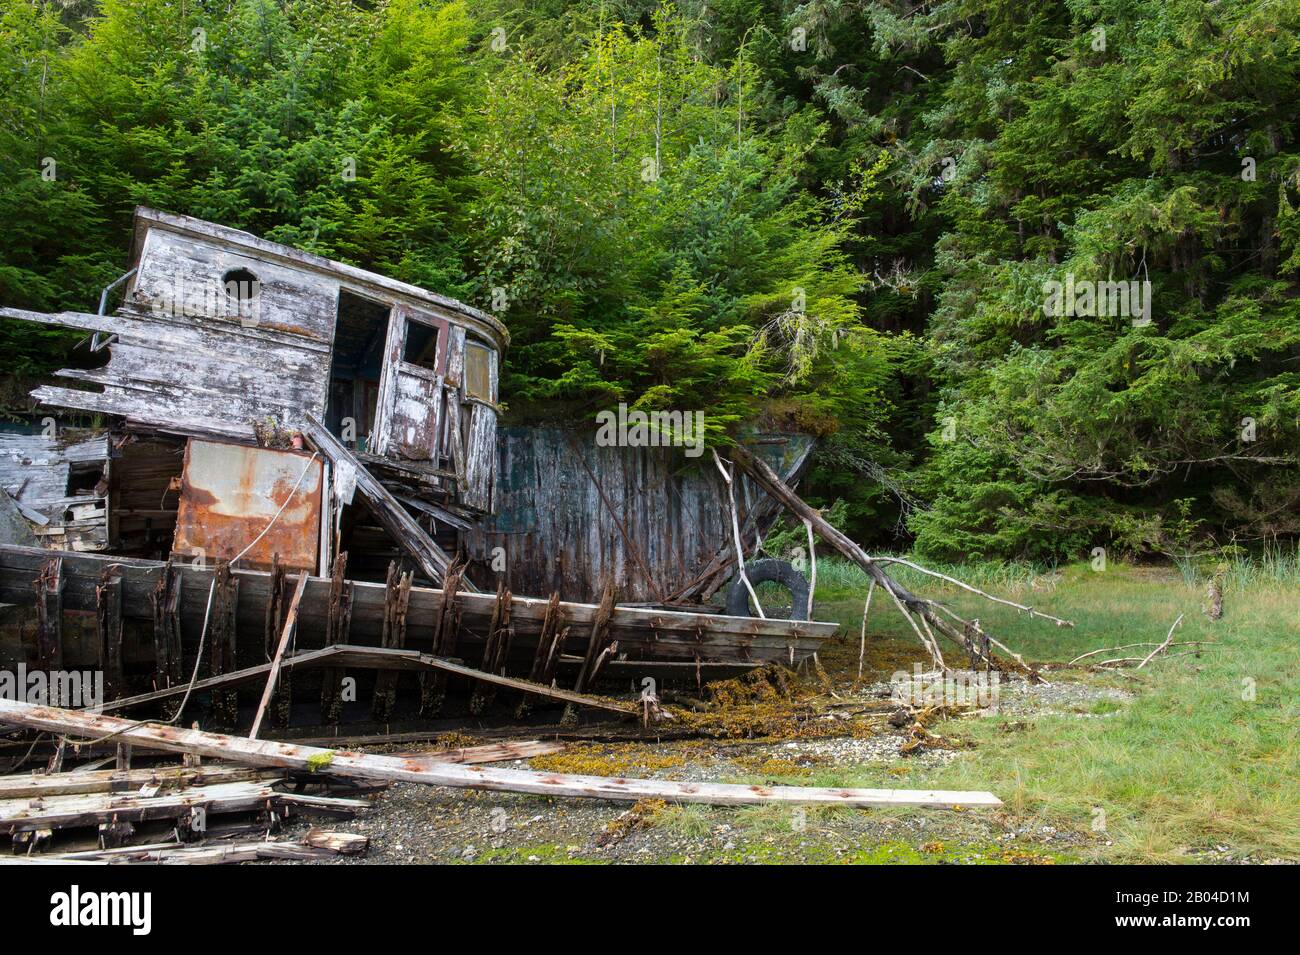 Wrecked wooden boat on beach in Security Bay off Frederick Sound, Tongass National Forest, Southeast Alaska, USA. Stock Photo